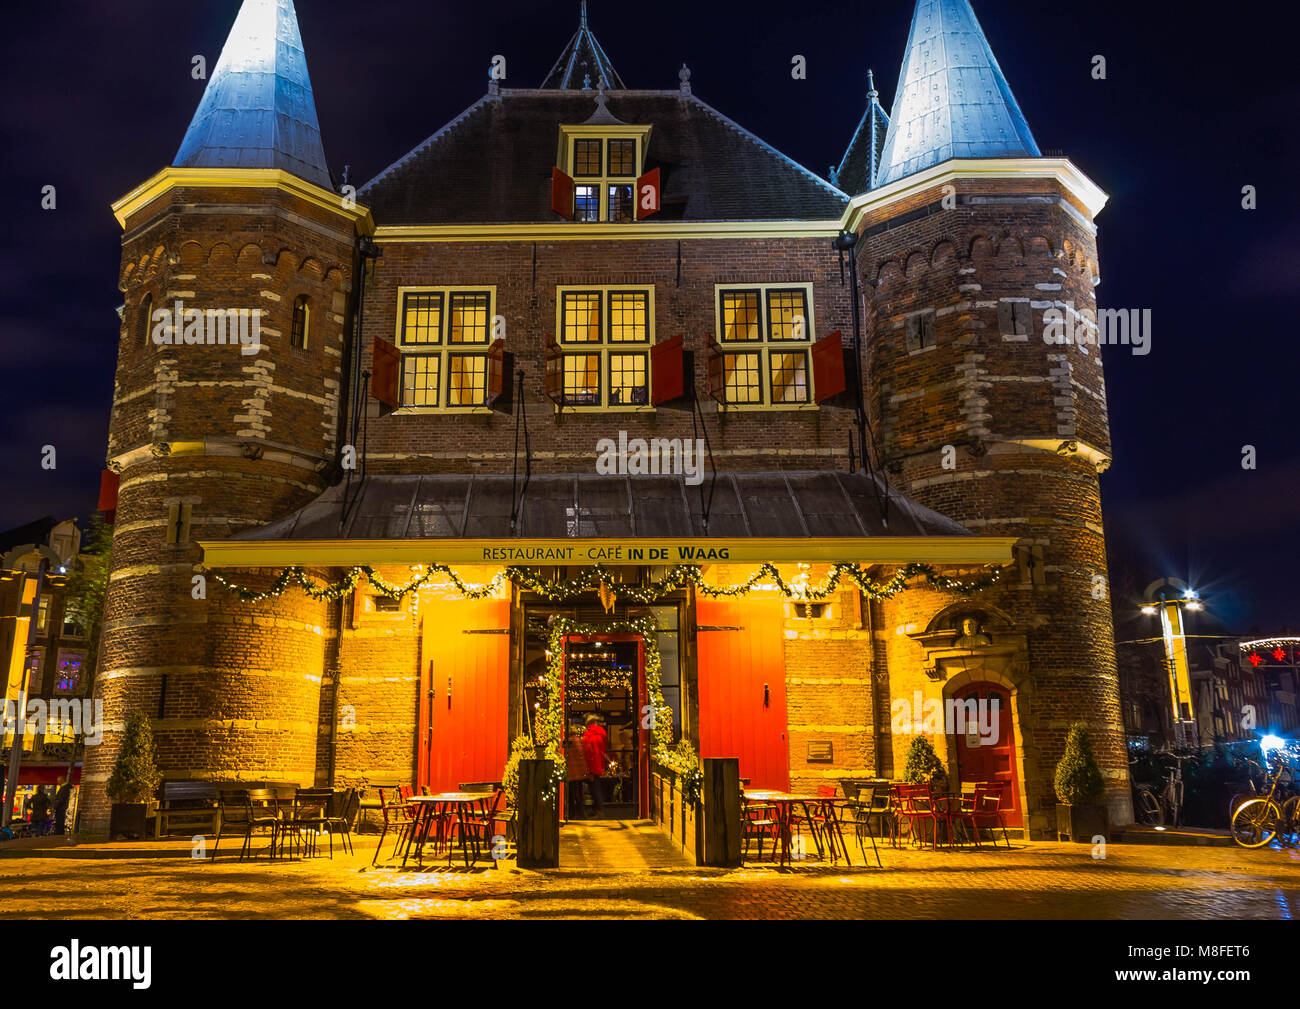 Amsterdam, Netherlands - December 14, 2017: Weigh house or Waag at Nieuwmarkt or New market square in Amsterdam Stock Photo